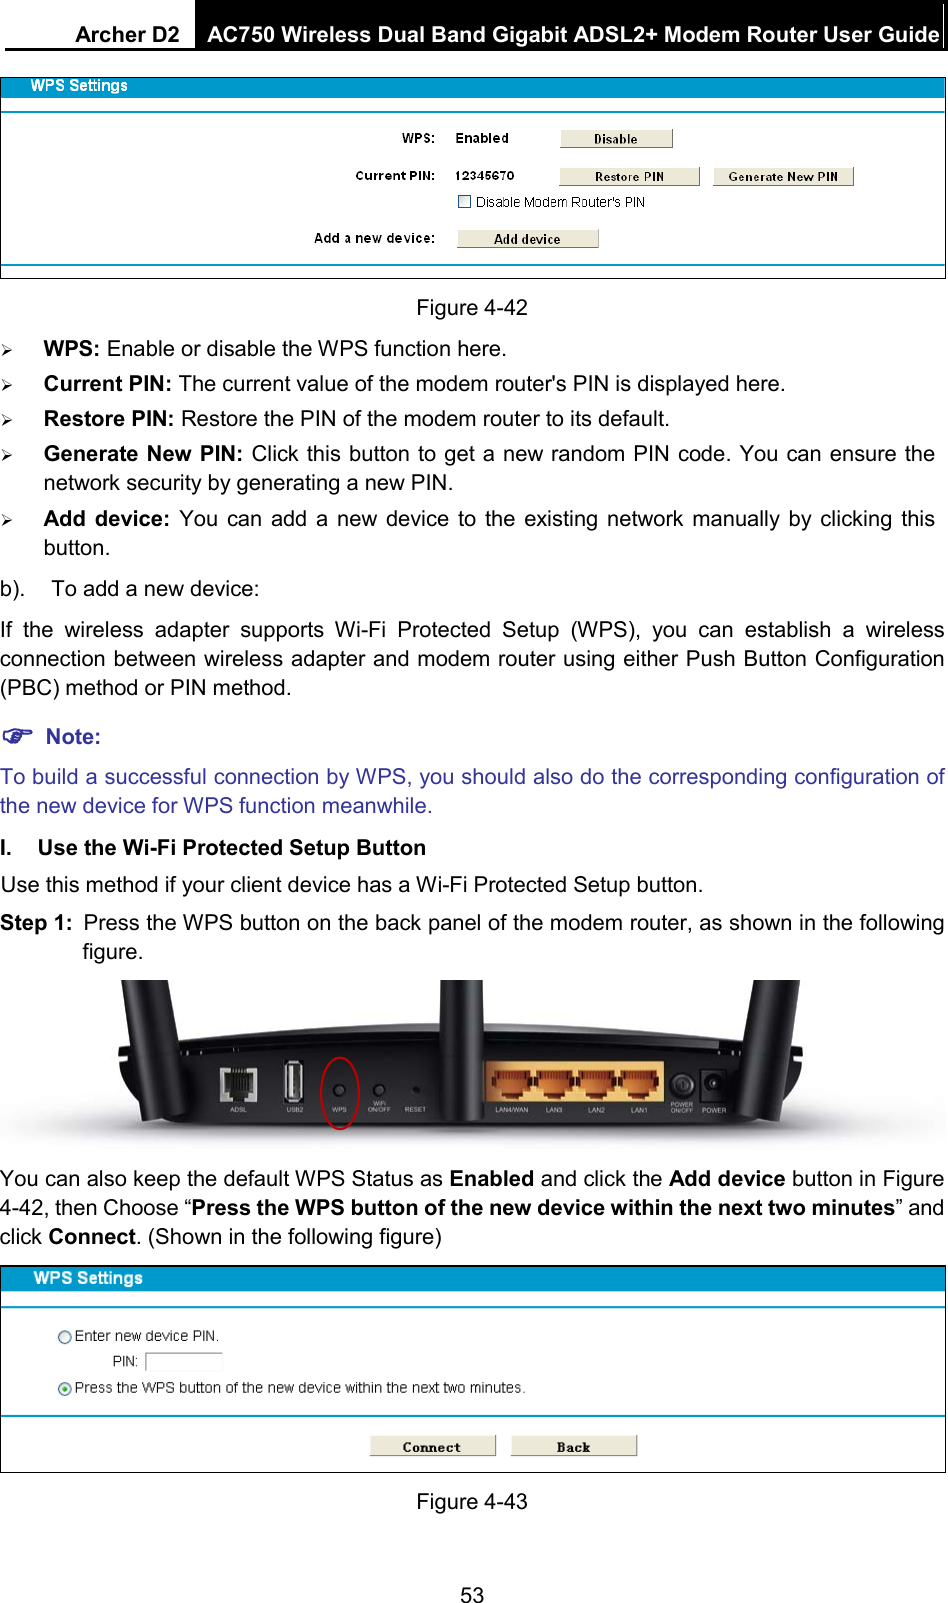 Archer D2 AC750 Wireless Dual Band Gigabit ADSL2+ Modem Router User Guide   Figure 4-42  WPS: Enable or disable the WPS function here.    Current PIN: The current value of the modem router&apos;s PIN is displayed here.    Restore PIN: Restore the PIN of the modem router to its default.    Generate New PIN: Click this button to get a new random PIN code. You can ensure the network security by generating a new PIN.  Add  device:  You can add a new device to the existing network manually by clicking this button. b). To add a new device: If  the wireless adapter supports Wi-Fi Protected Setup (WPS), you can establish a wireless connection between wireless adapter and modem router using either Push Button Configuration (PBC) method or PIN method.  Note: To build a successful connection by WPS, you should also do the corresponding configuration of the new device for WPS function meanwhile. I. Use the Wi-Fi Protected Setup Button Use this method if your client device has a Wi-Fi Protected Setup button. Step 1: Press the WPS button on the back panel of the modem router, as shown in the following figure.  You can also keep the default WPS Status as Enabled and click the Add device button in Figure 4-42, then Choose “Press the WPS button of the new device within the next two minutes” and click Connect. (Shown in the following figure)  Figure 4-43 53 